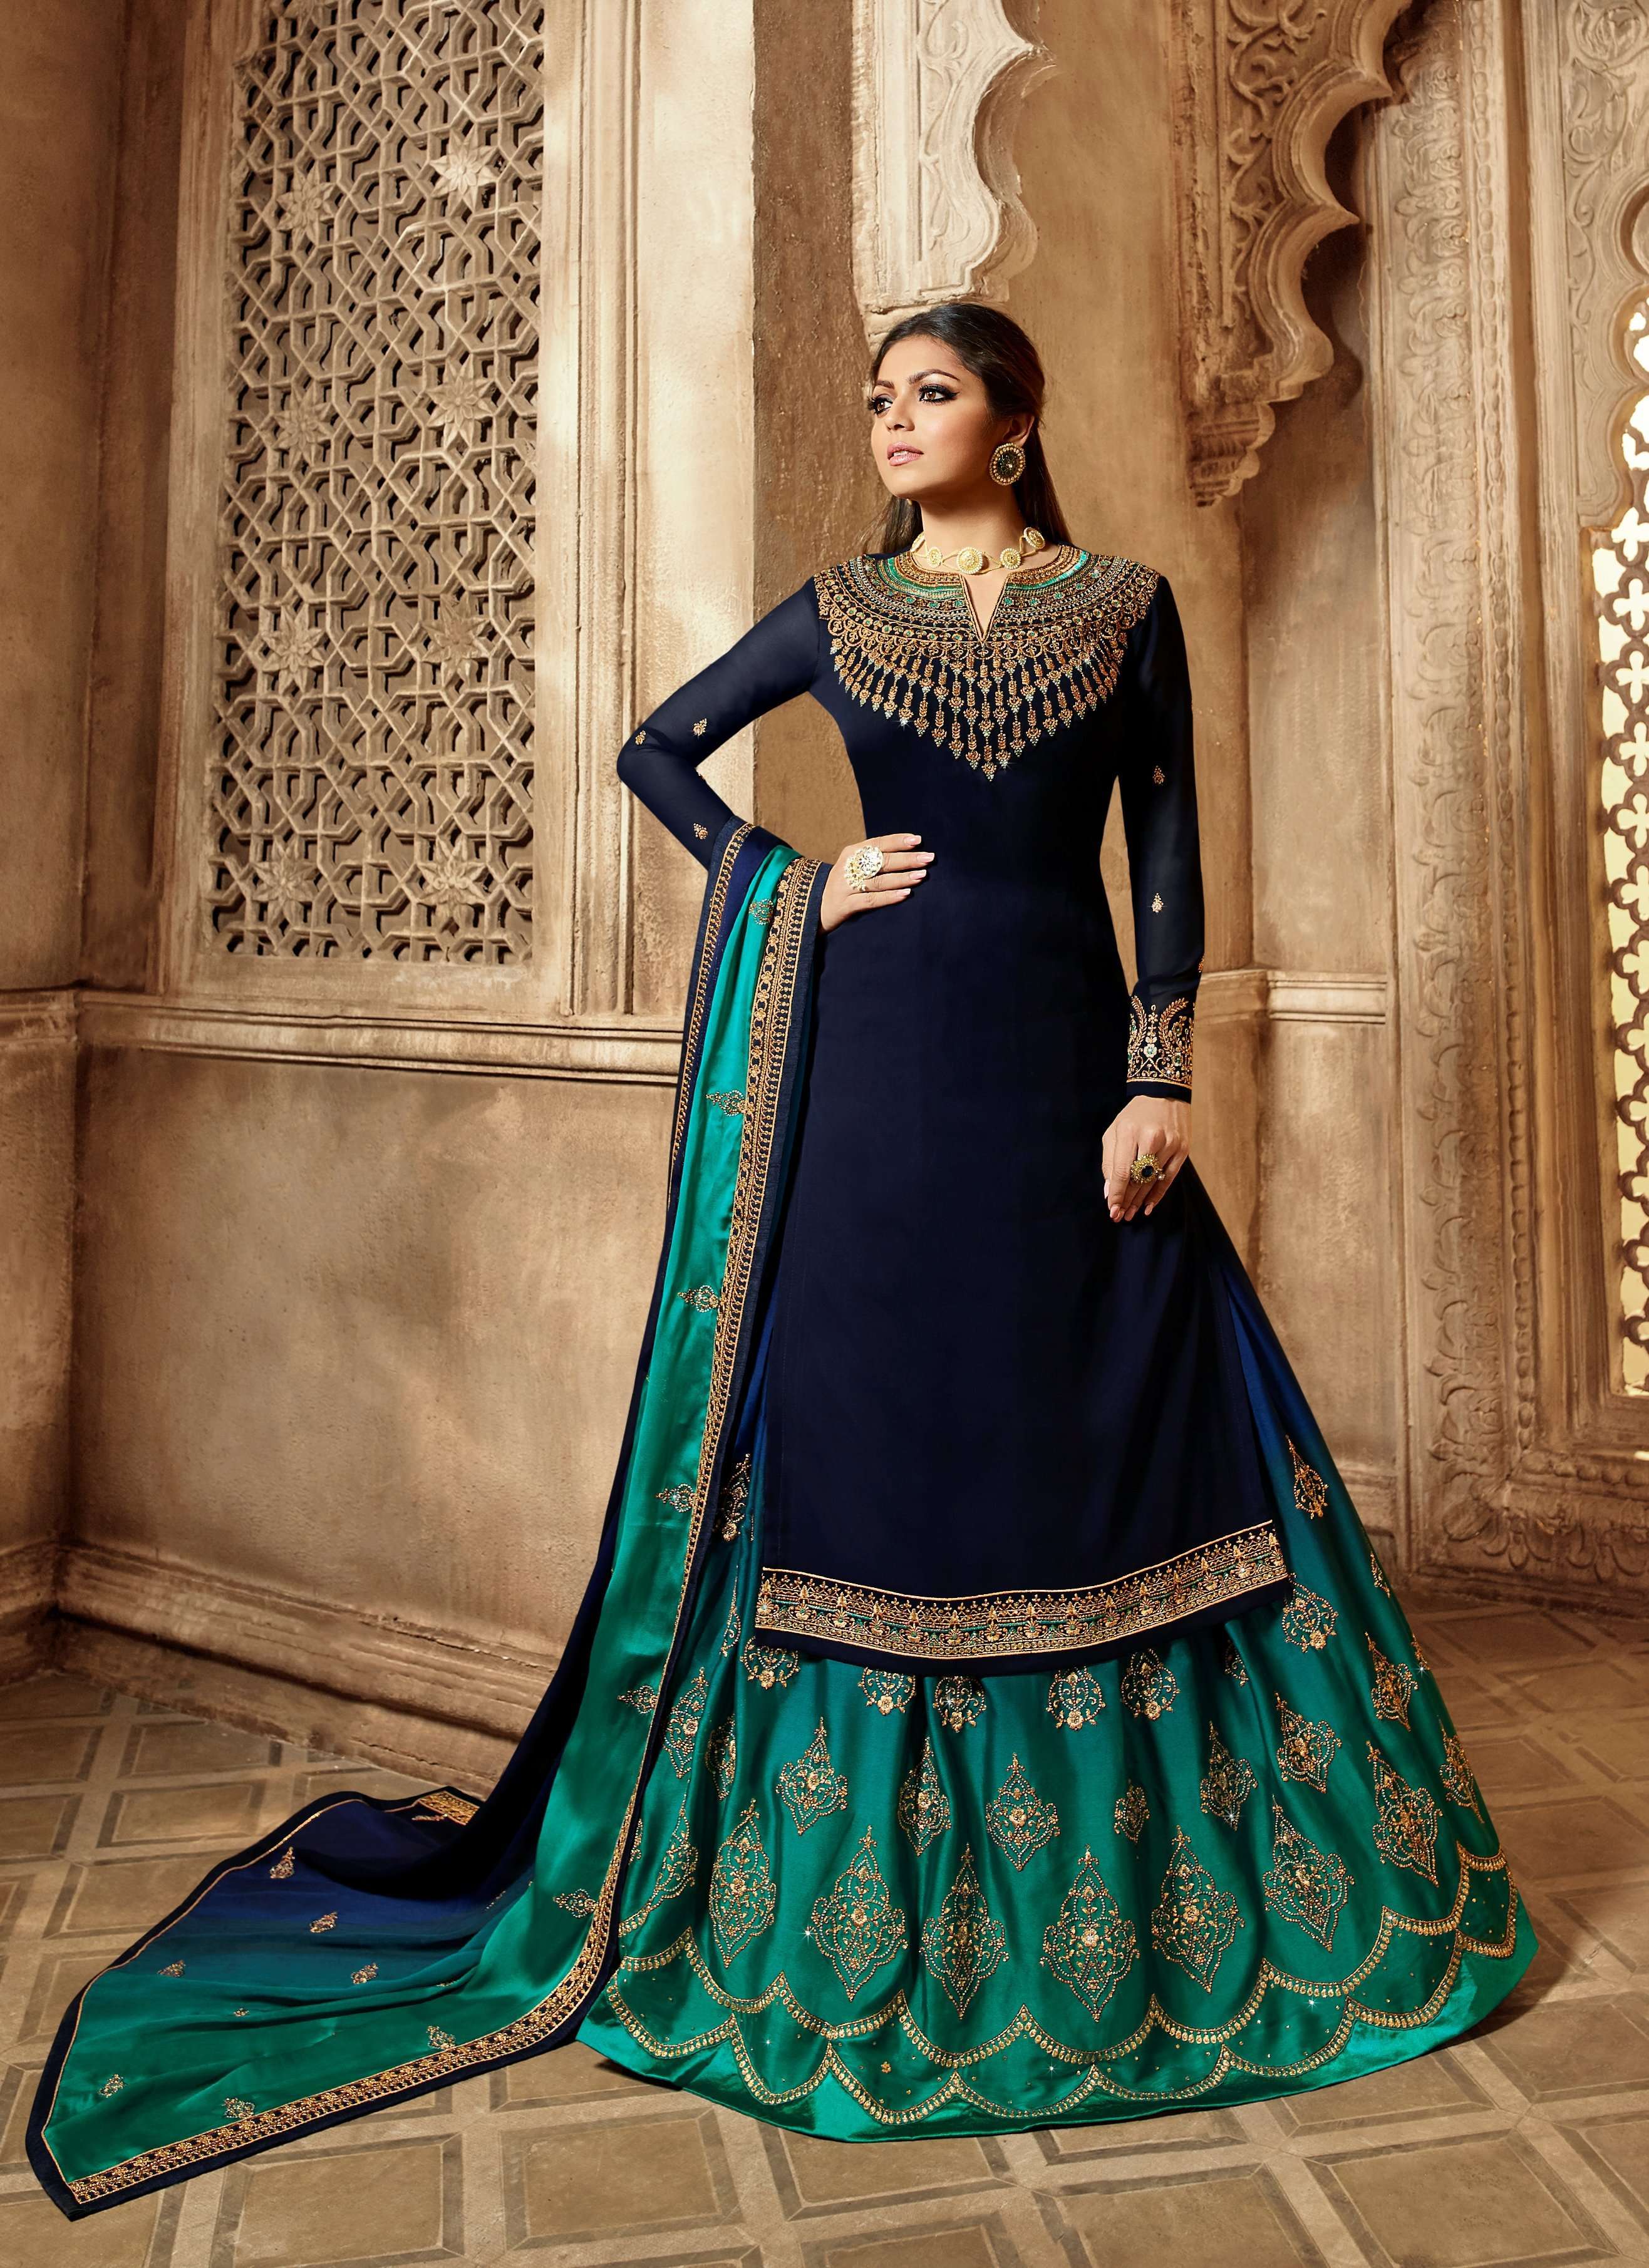 Agarwal's Sarees and Suits - Lehenga - Udaipur City - Weddingwire.in